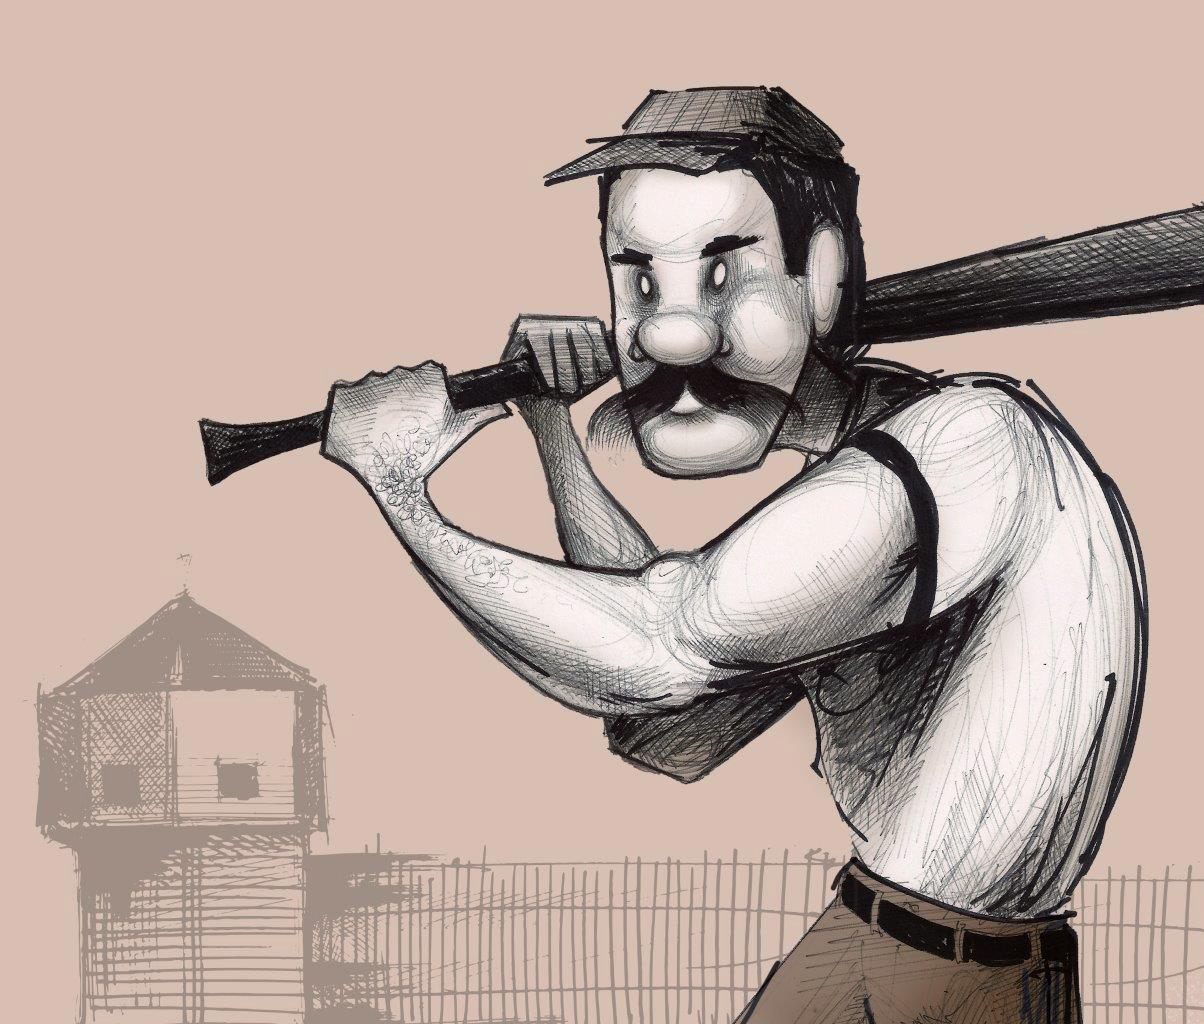 Fort Vancouver hosts annual vintage 'base ball' match.